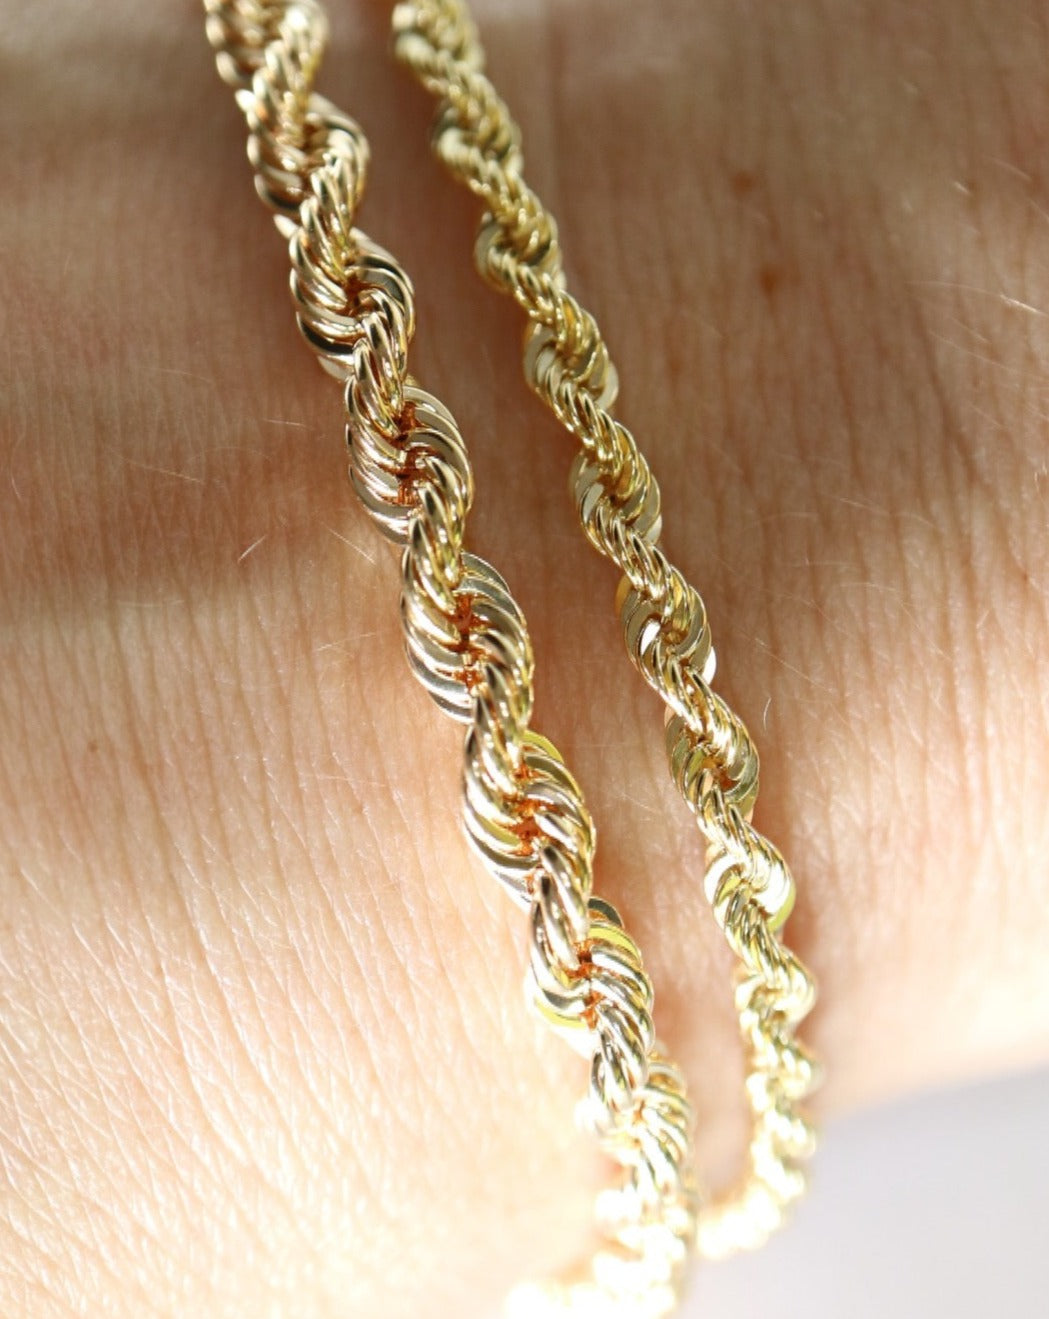 9ct gold rope bracelets from That's My Story Jewellery